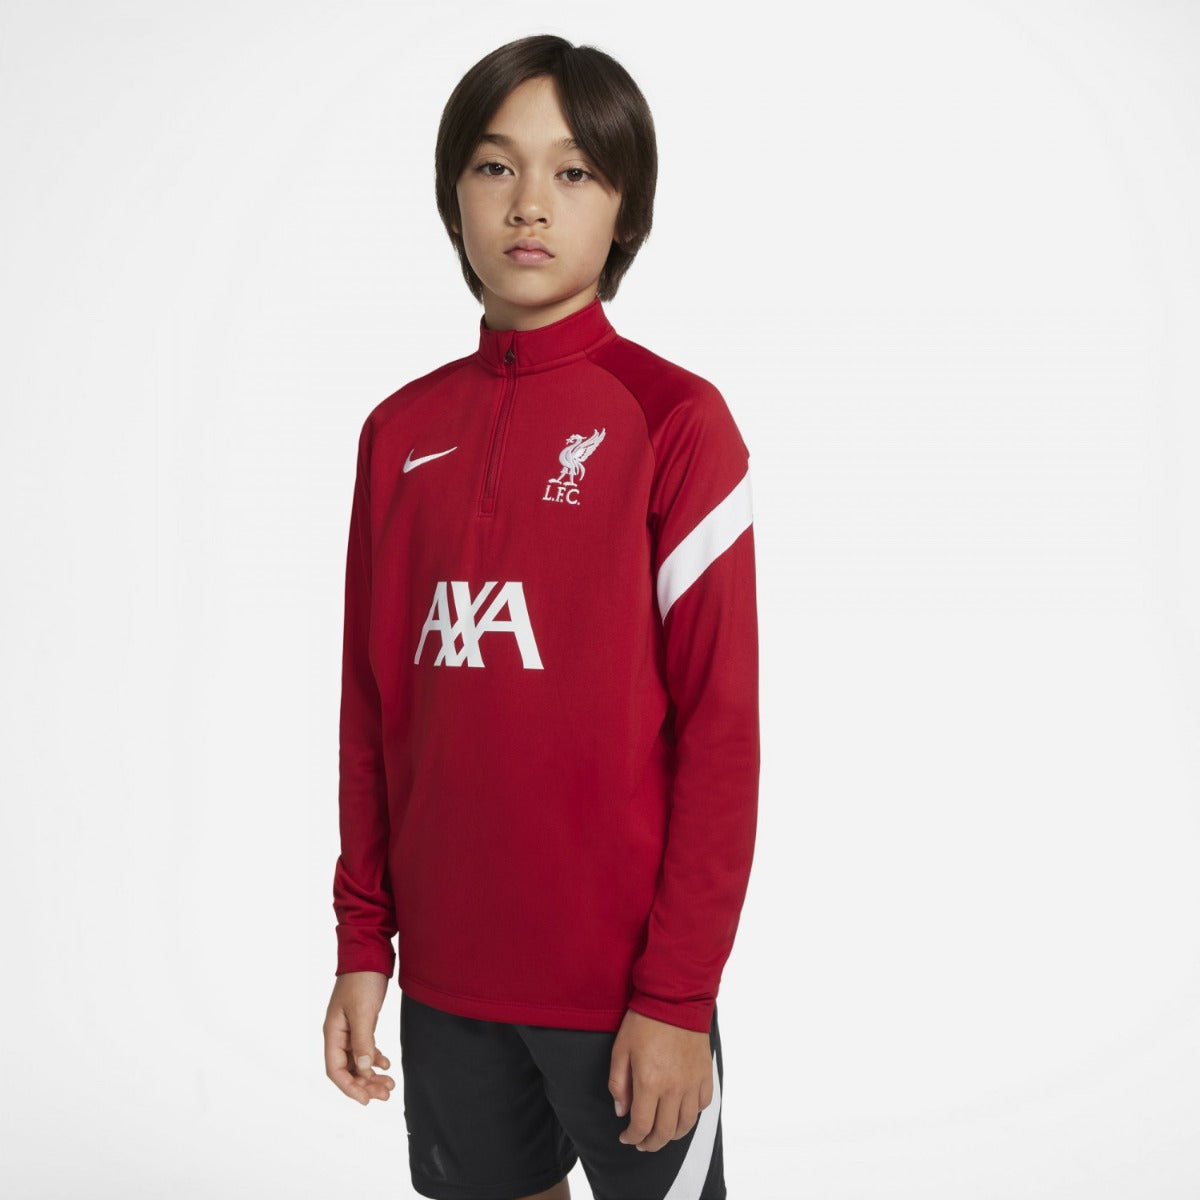 Liverpool Academy Pro Junior Training Top 2021/2022 - Red/White